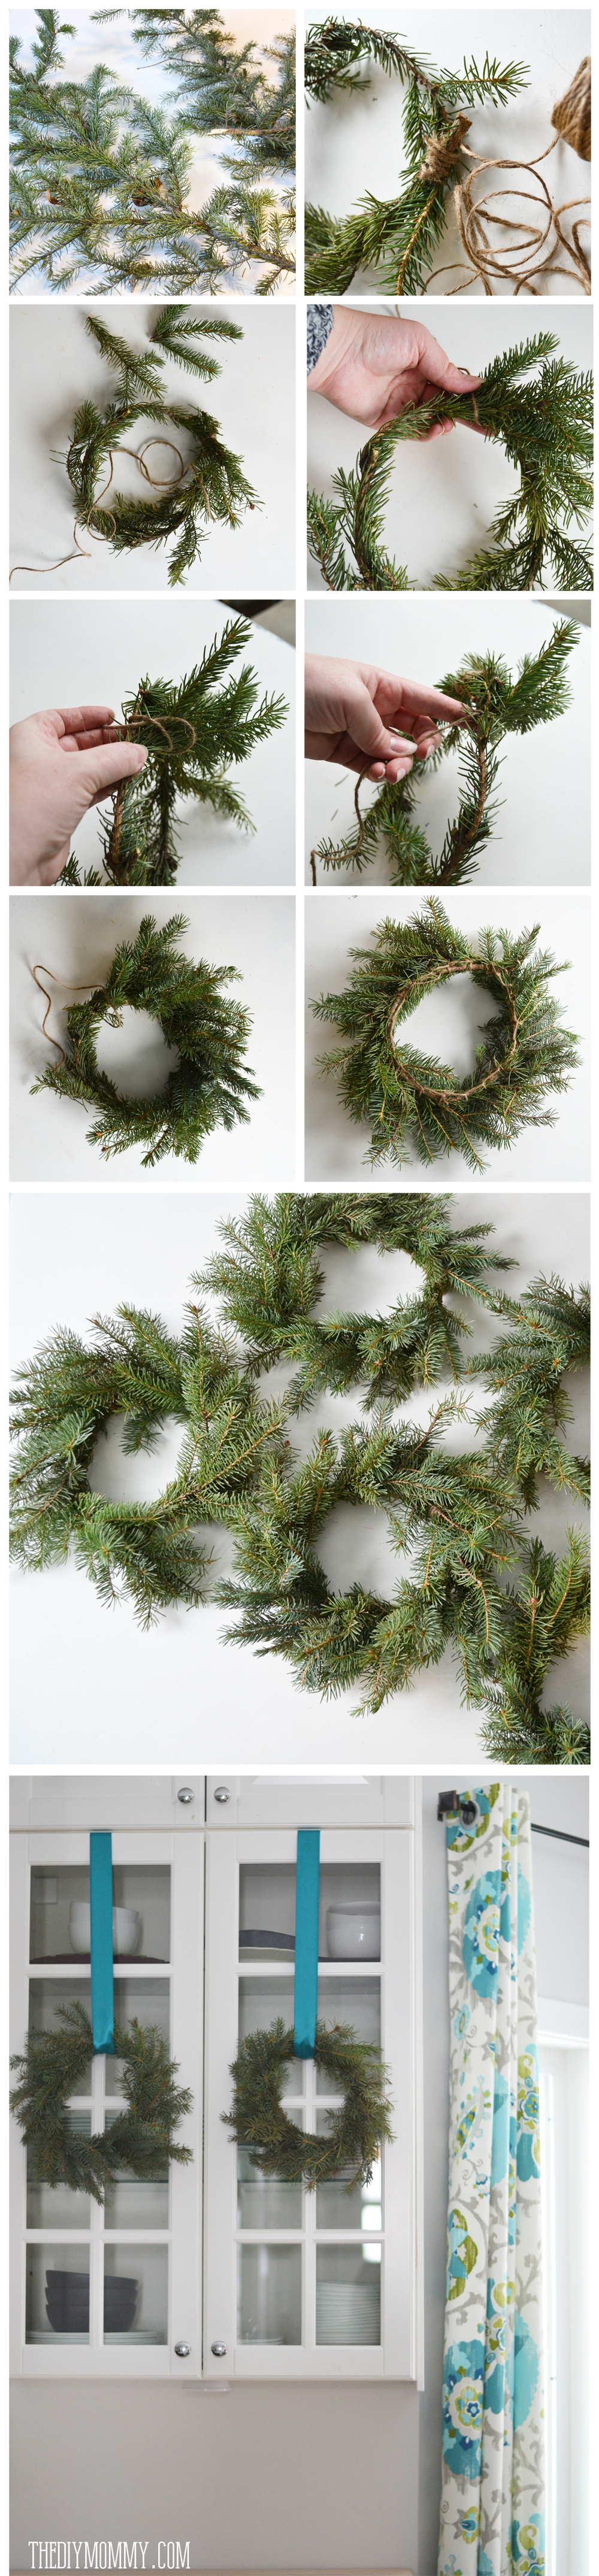 How to make real evergreen wreaths with just branches and twine